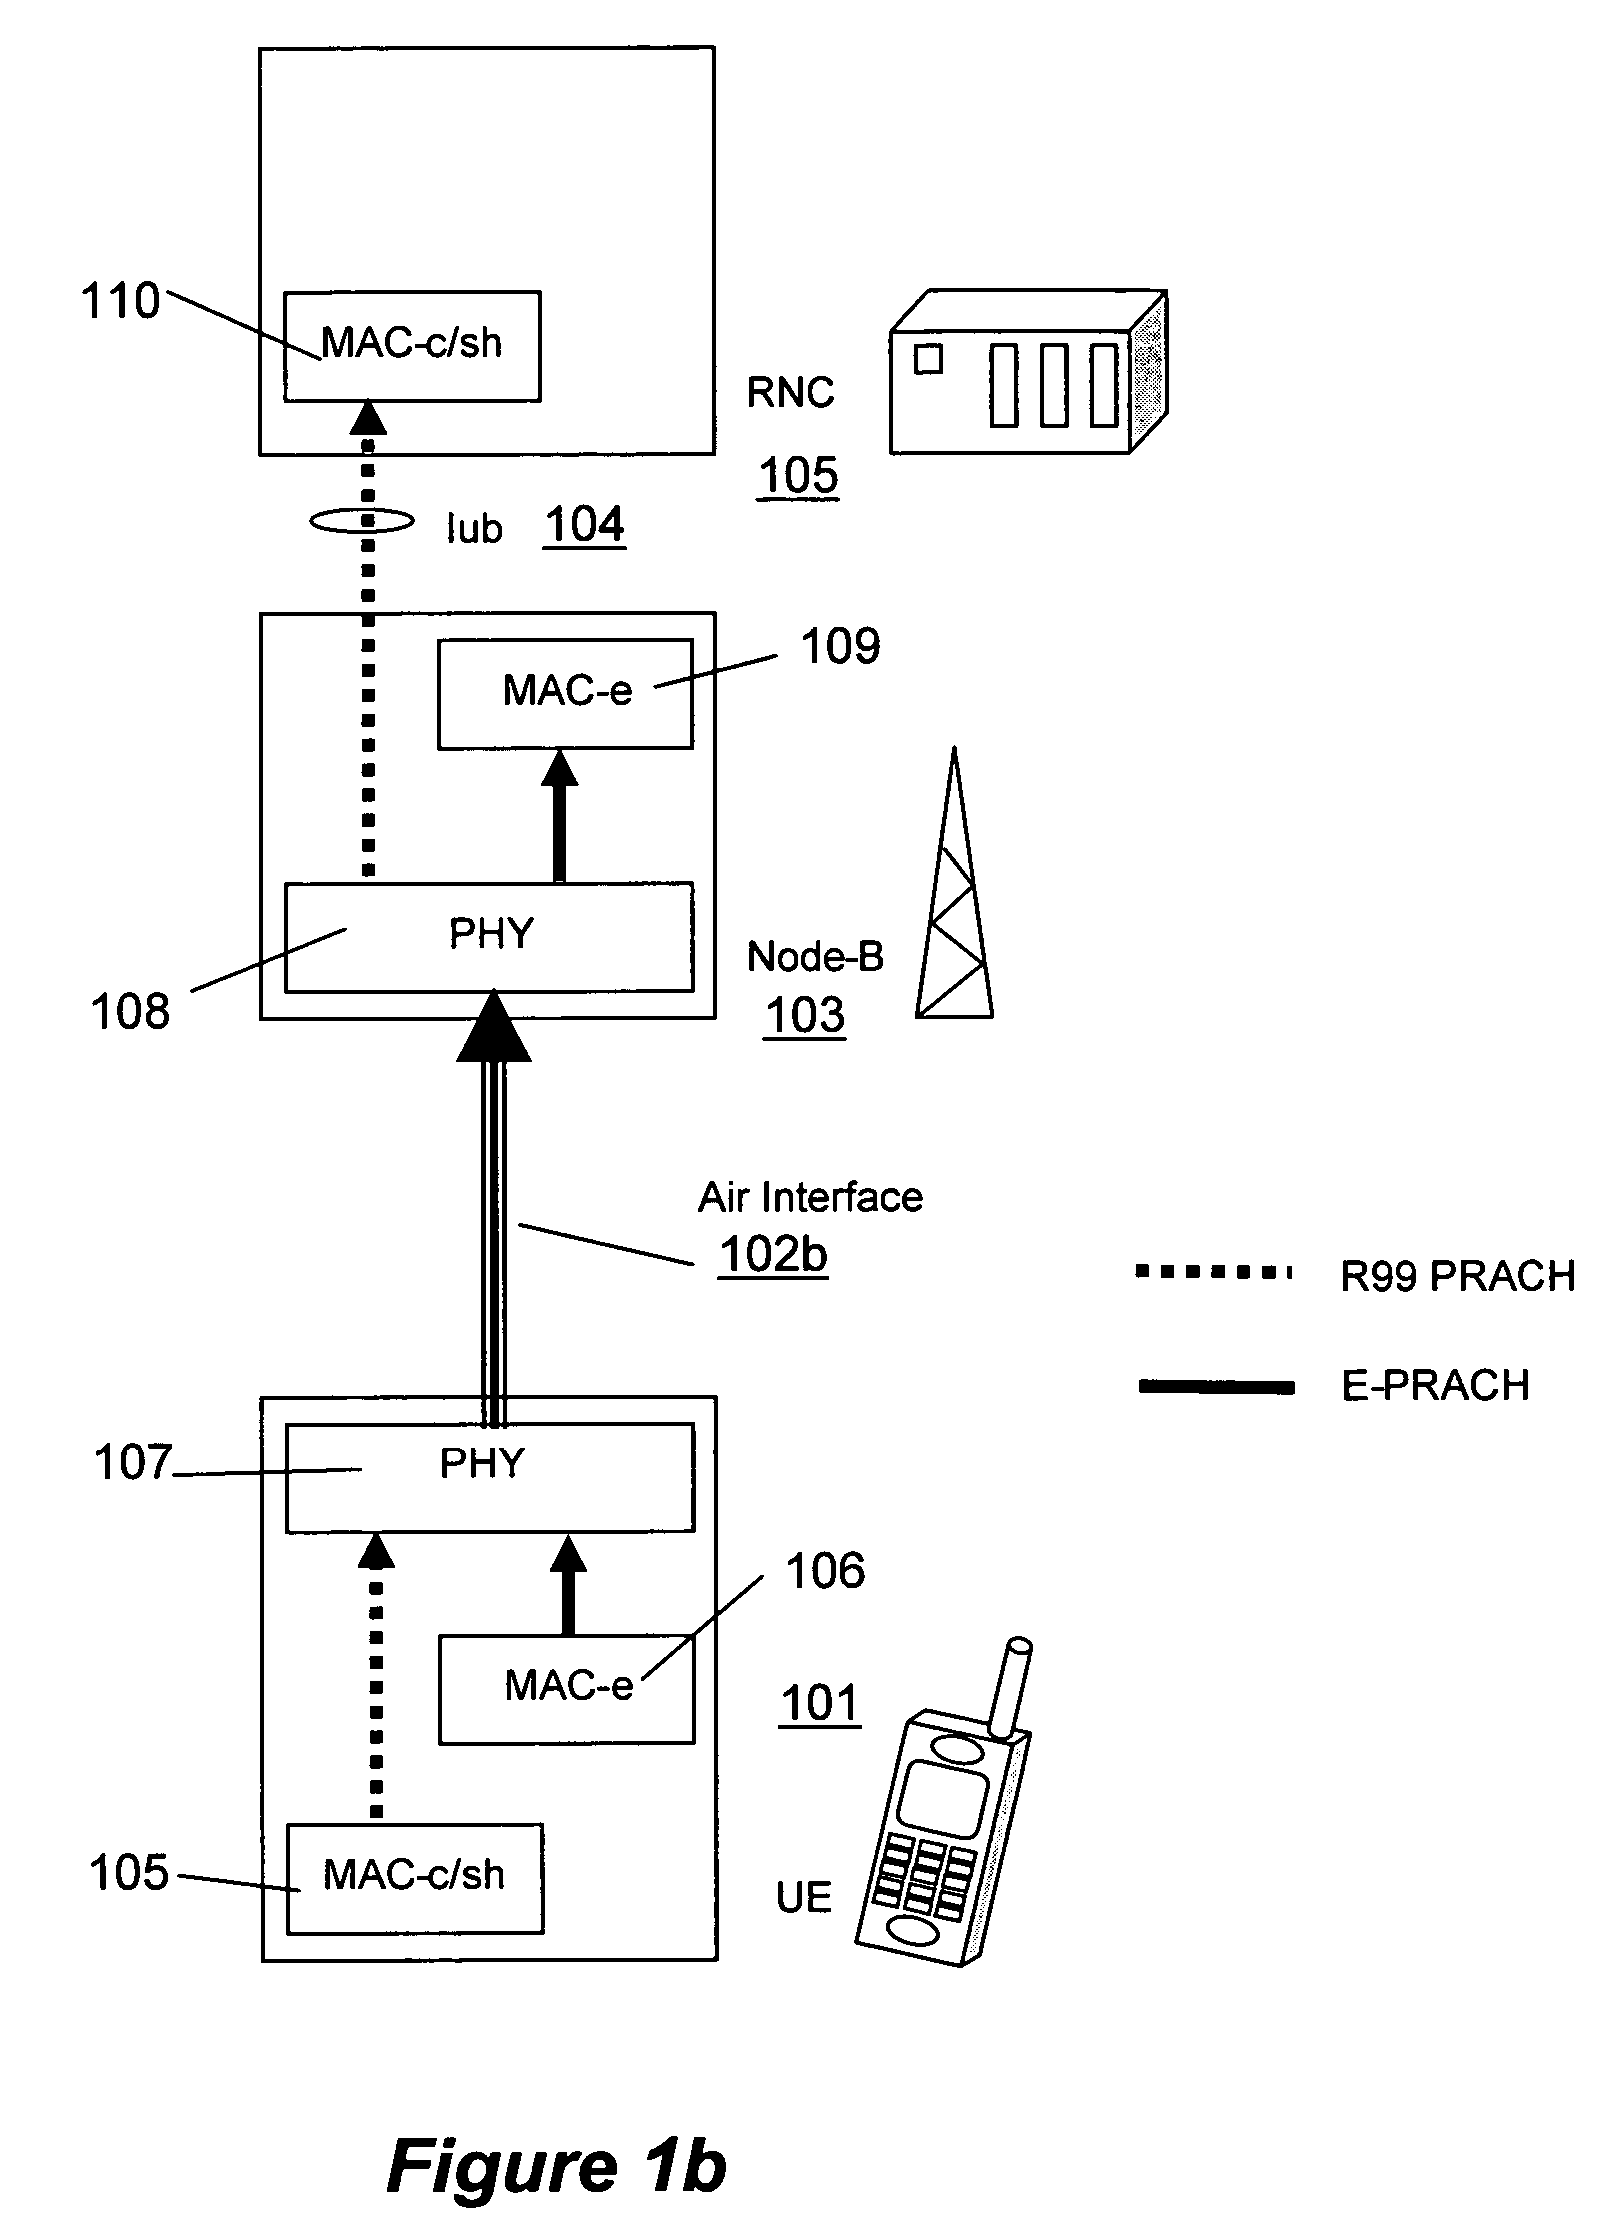 Data packet type recognition system